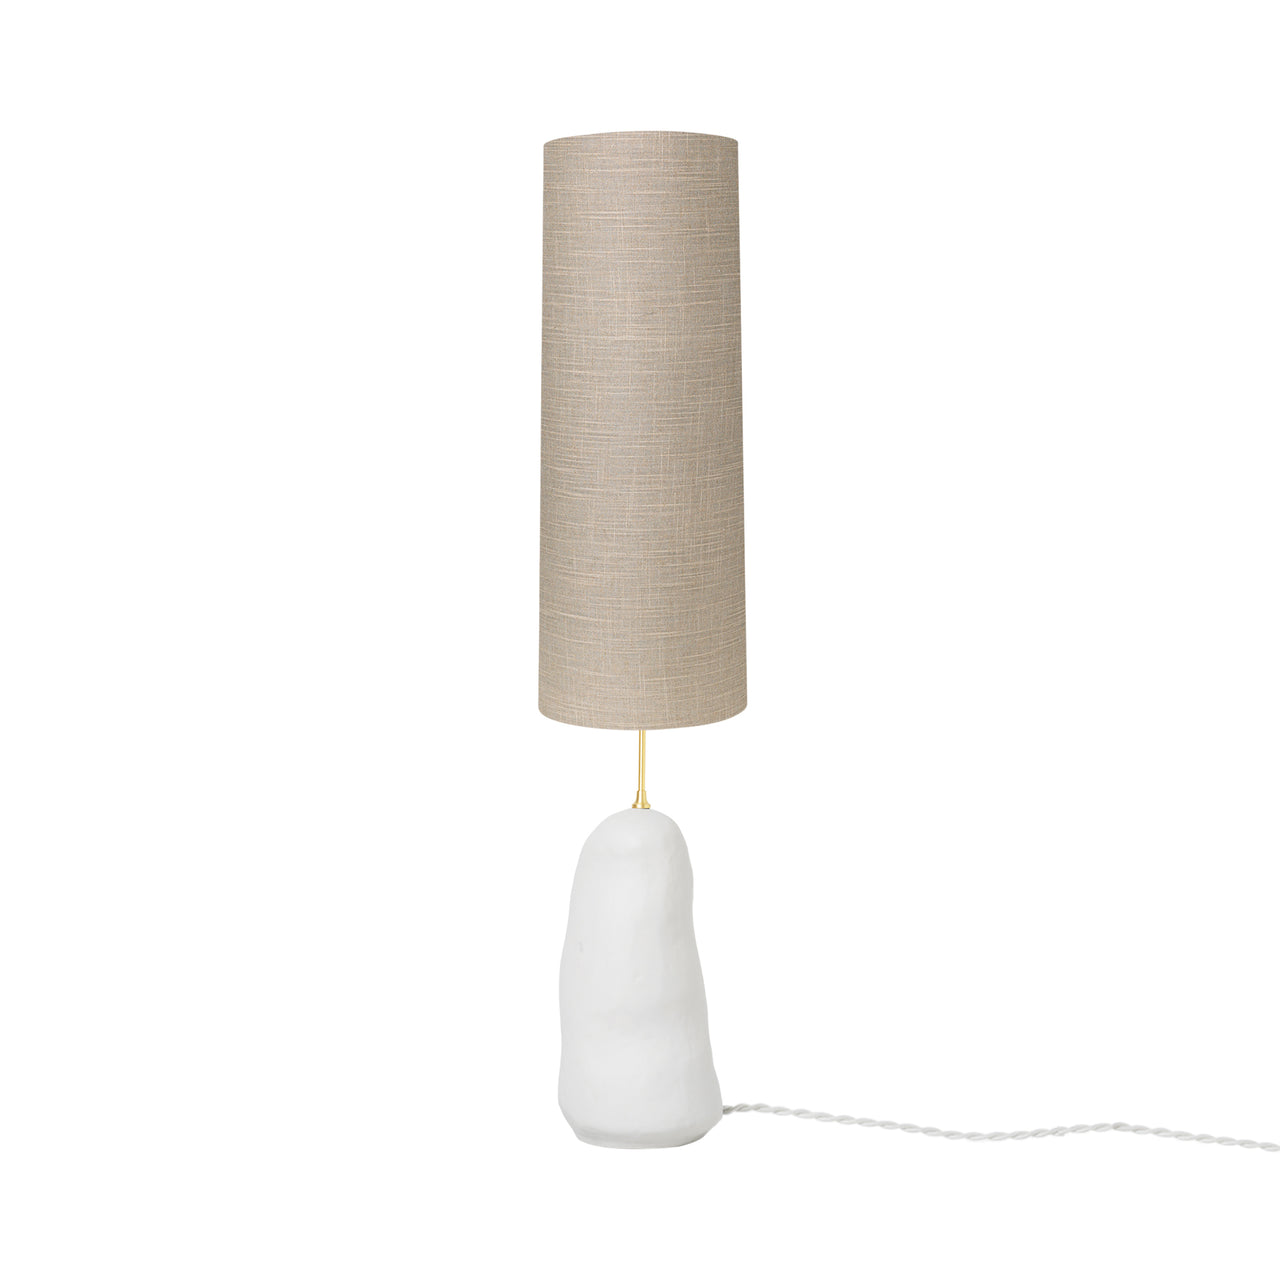 Hebe Lamp: Long + Sand + Off-White